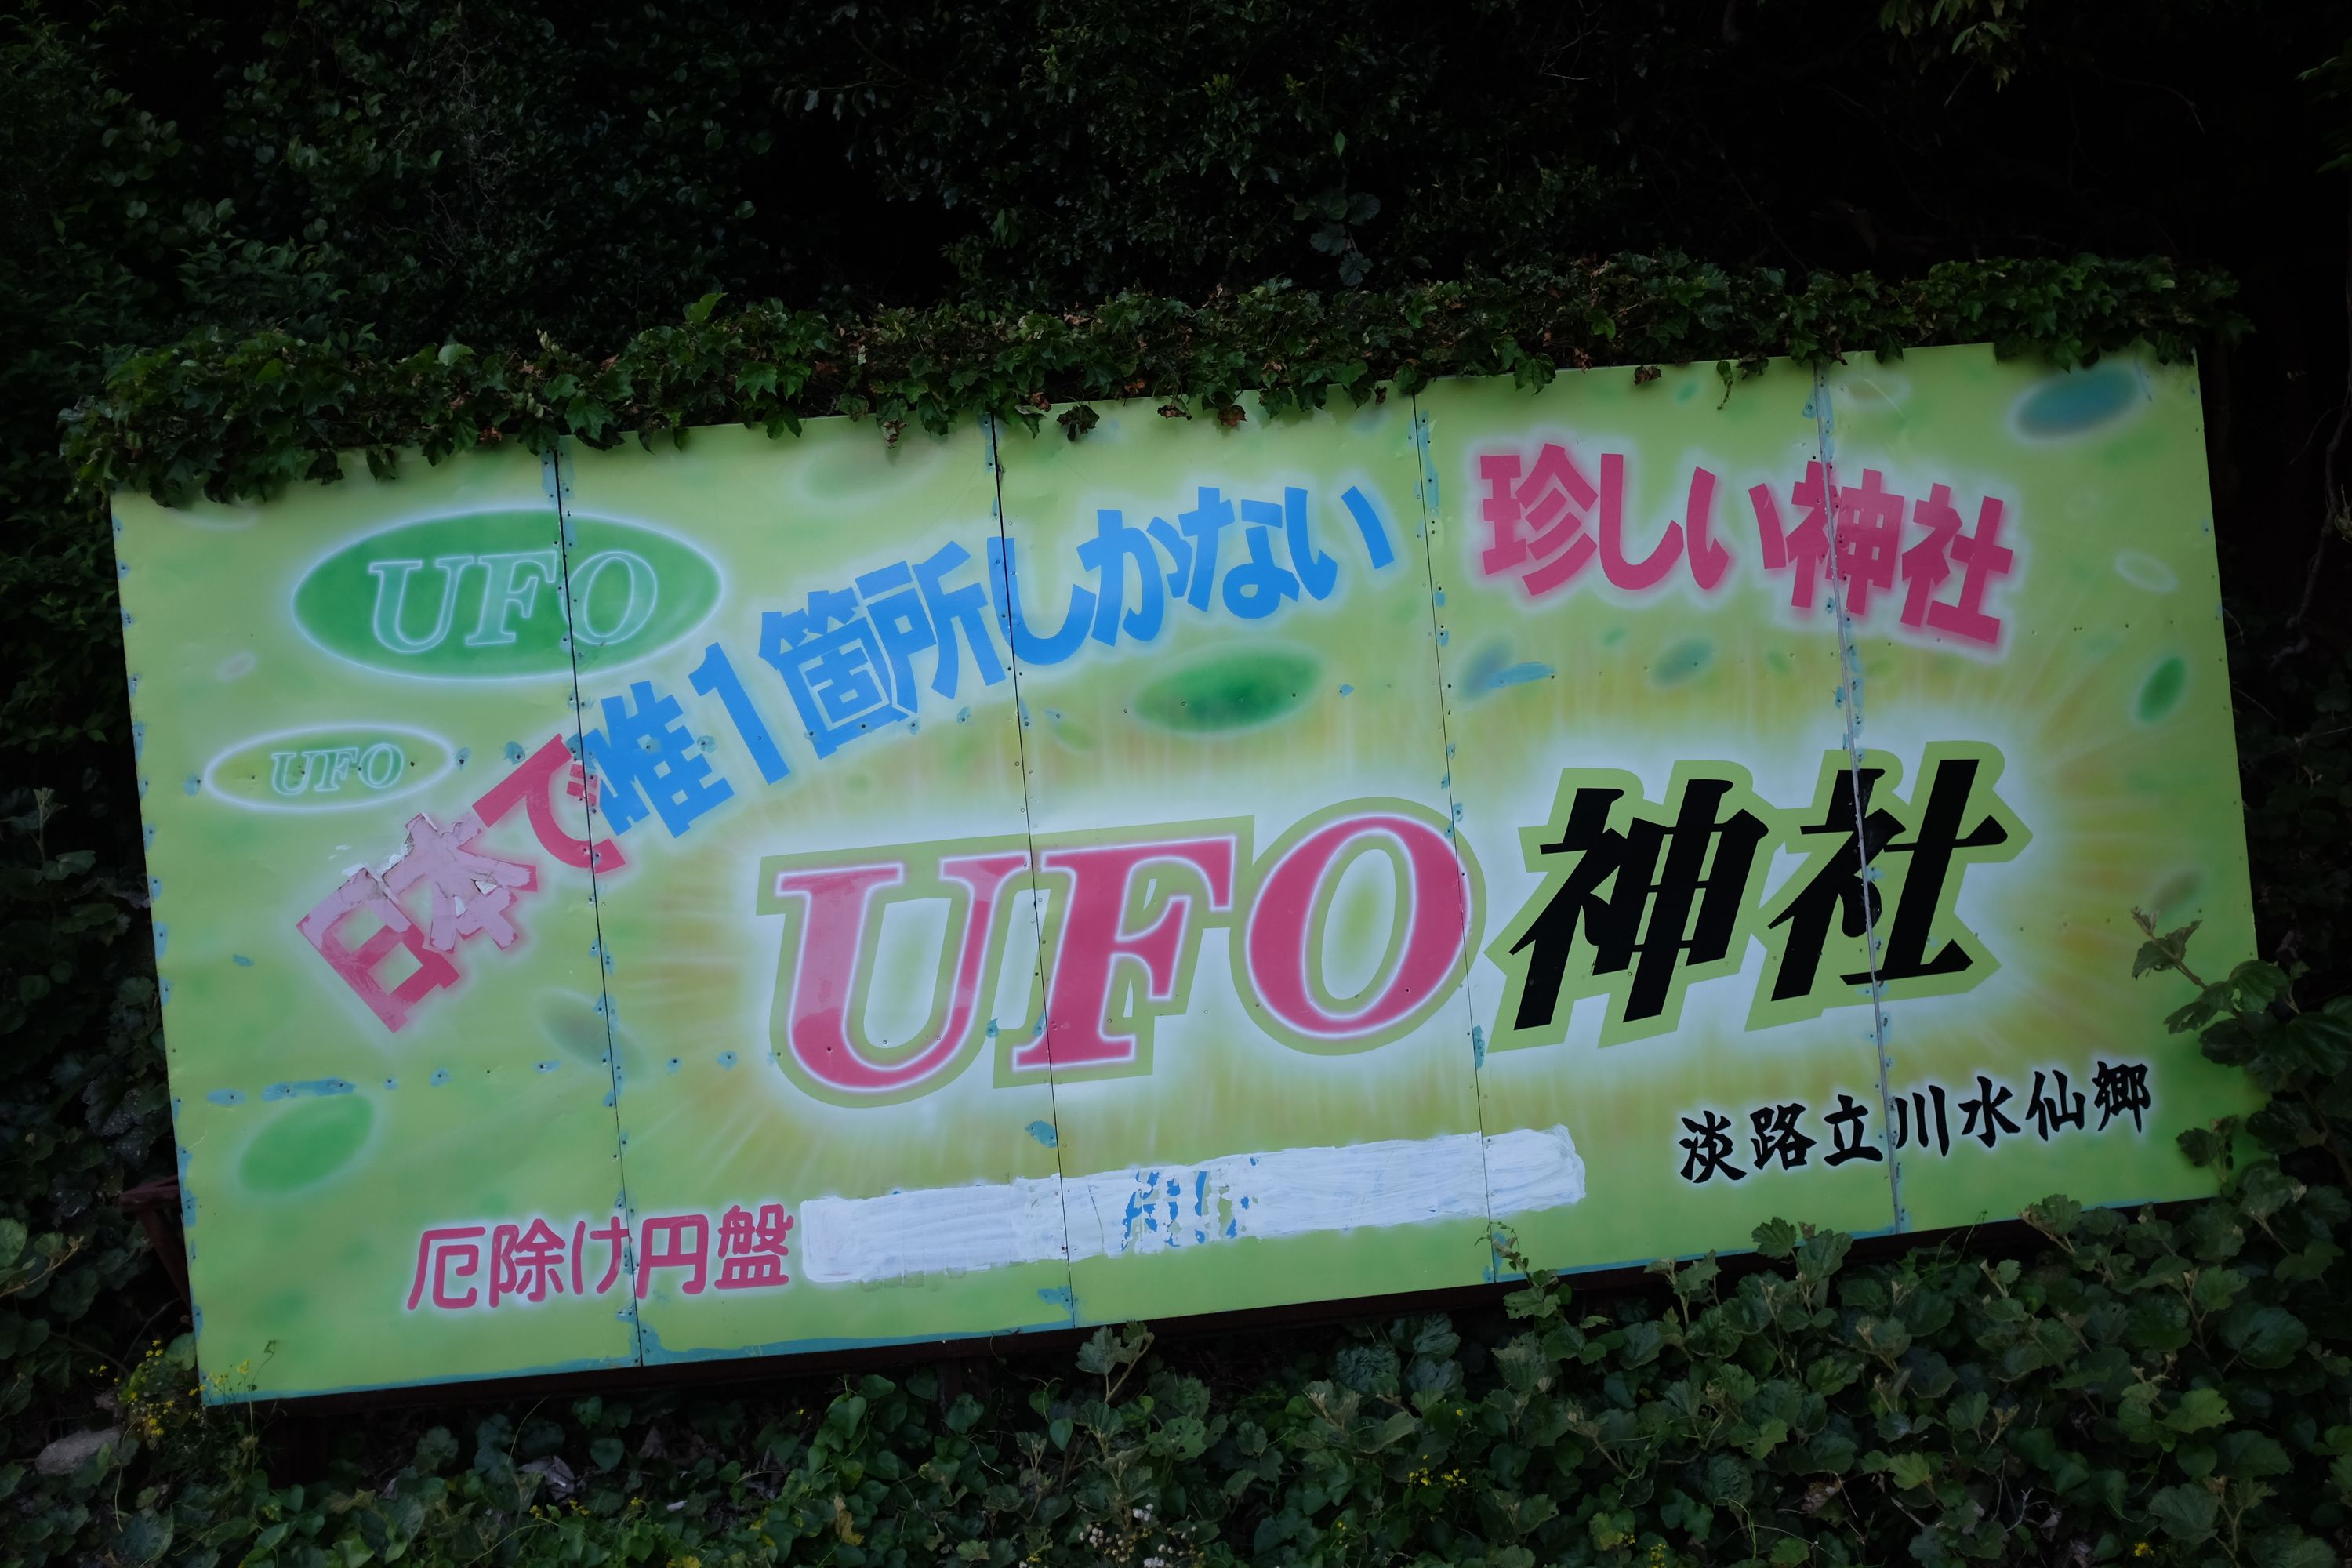 A sign advertising a UFO shrine, whatever that is.